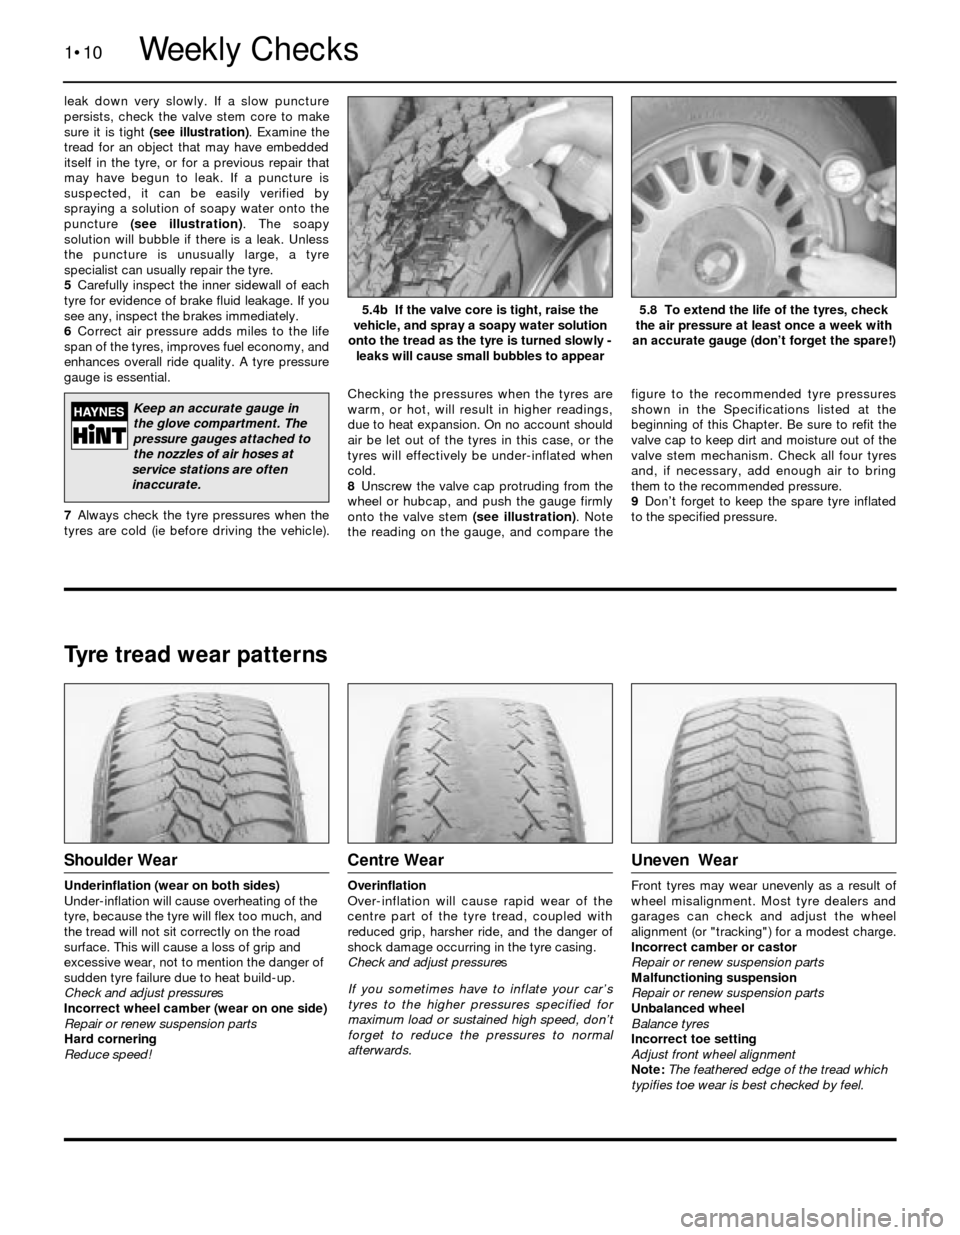 BMW 3 SERIES 1991 E30 Workshop Manual leak down very slowly. If a slow puncture
persists, check the valve stem core to make
sure it is tight (see illustration). Examine the
tread for an object that may have embedded
itself in the tyre, or